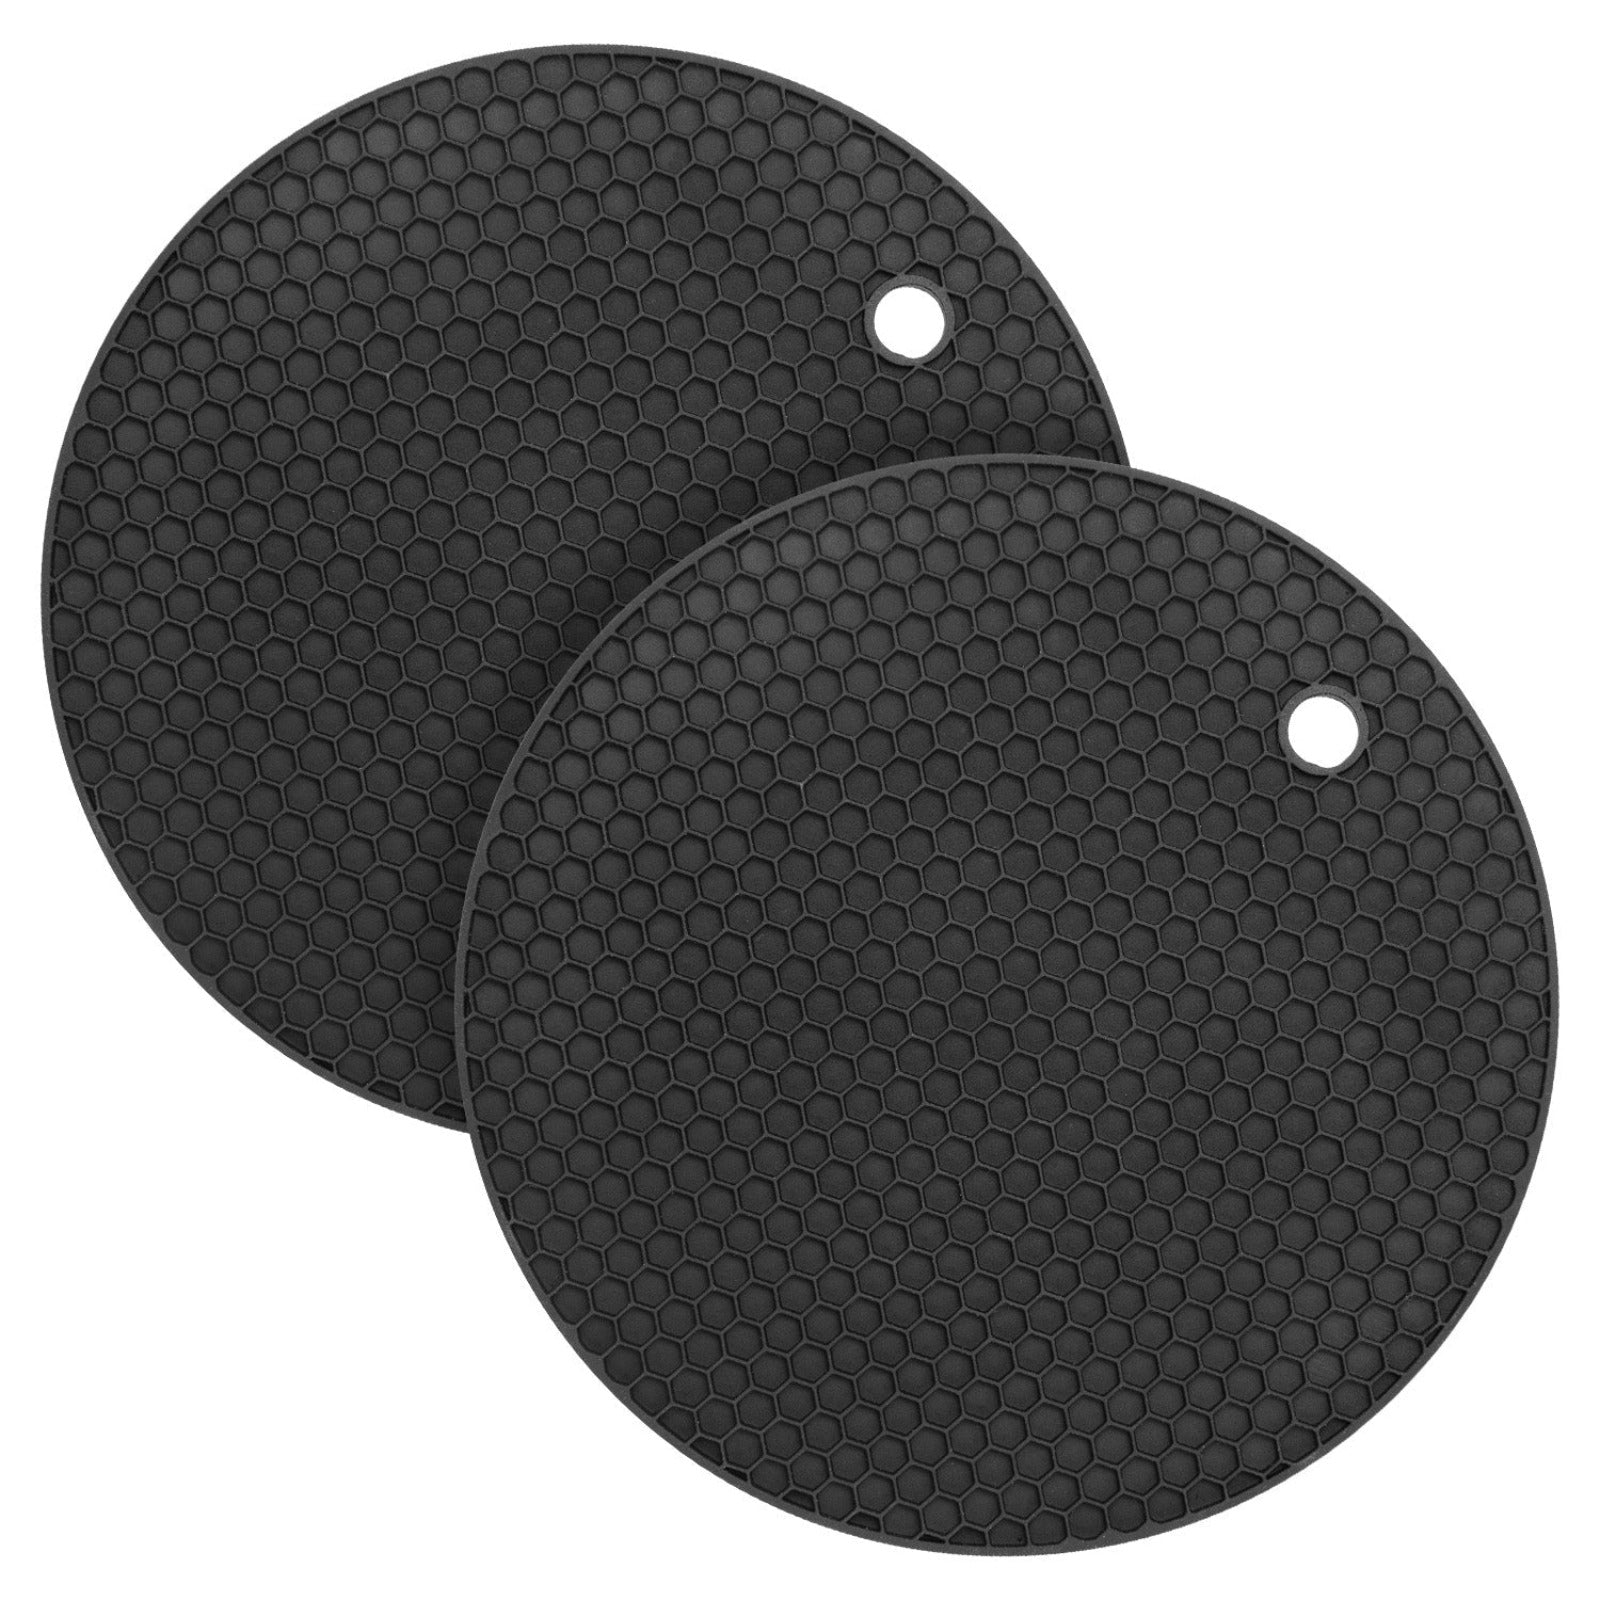 Kleva® Silicone Heat Mat Trivets Keep Your Surfaces Free From Heat Damage - 2 Pack  Bunnings Marketplace Black  